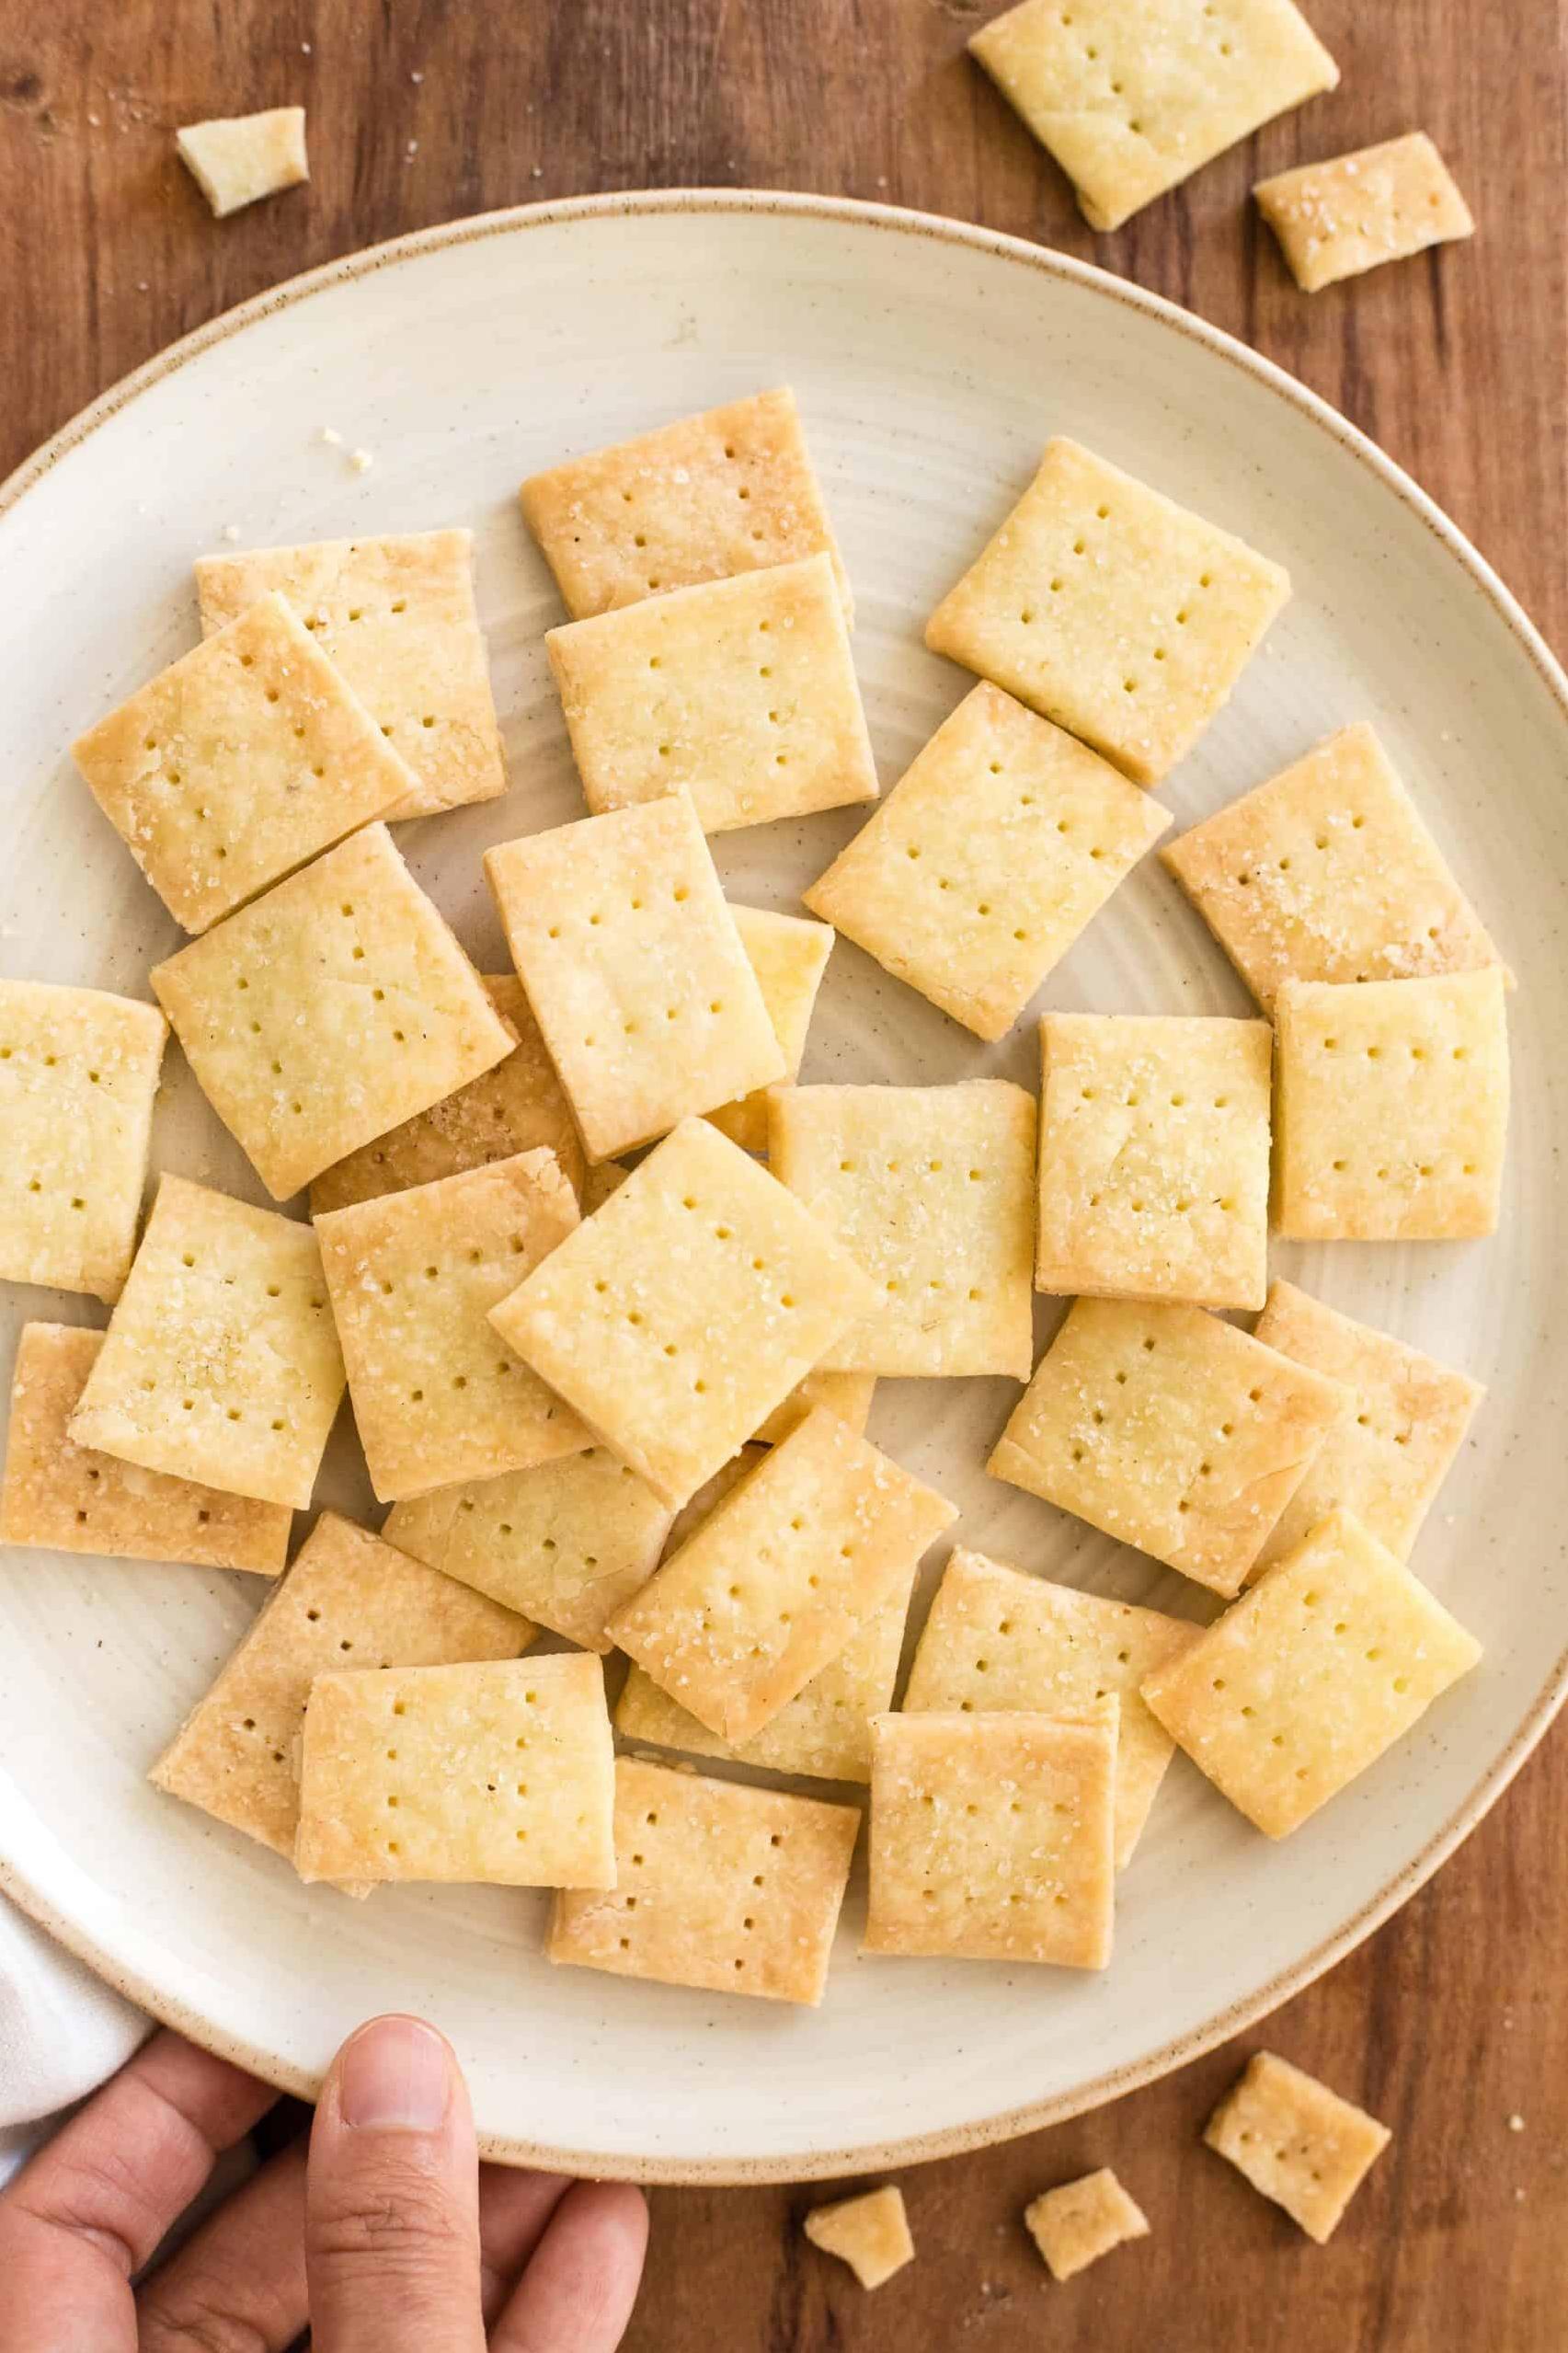  Crispy, crunchy, and cheesy all without real cheese? Check out this recipe for our Cheeseless Cheese Crackers!